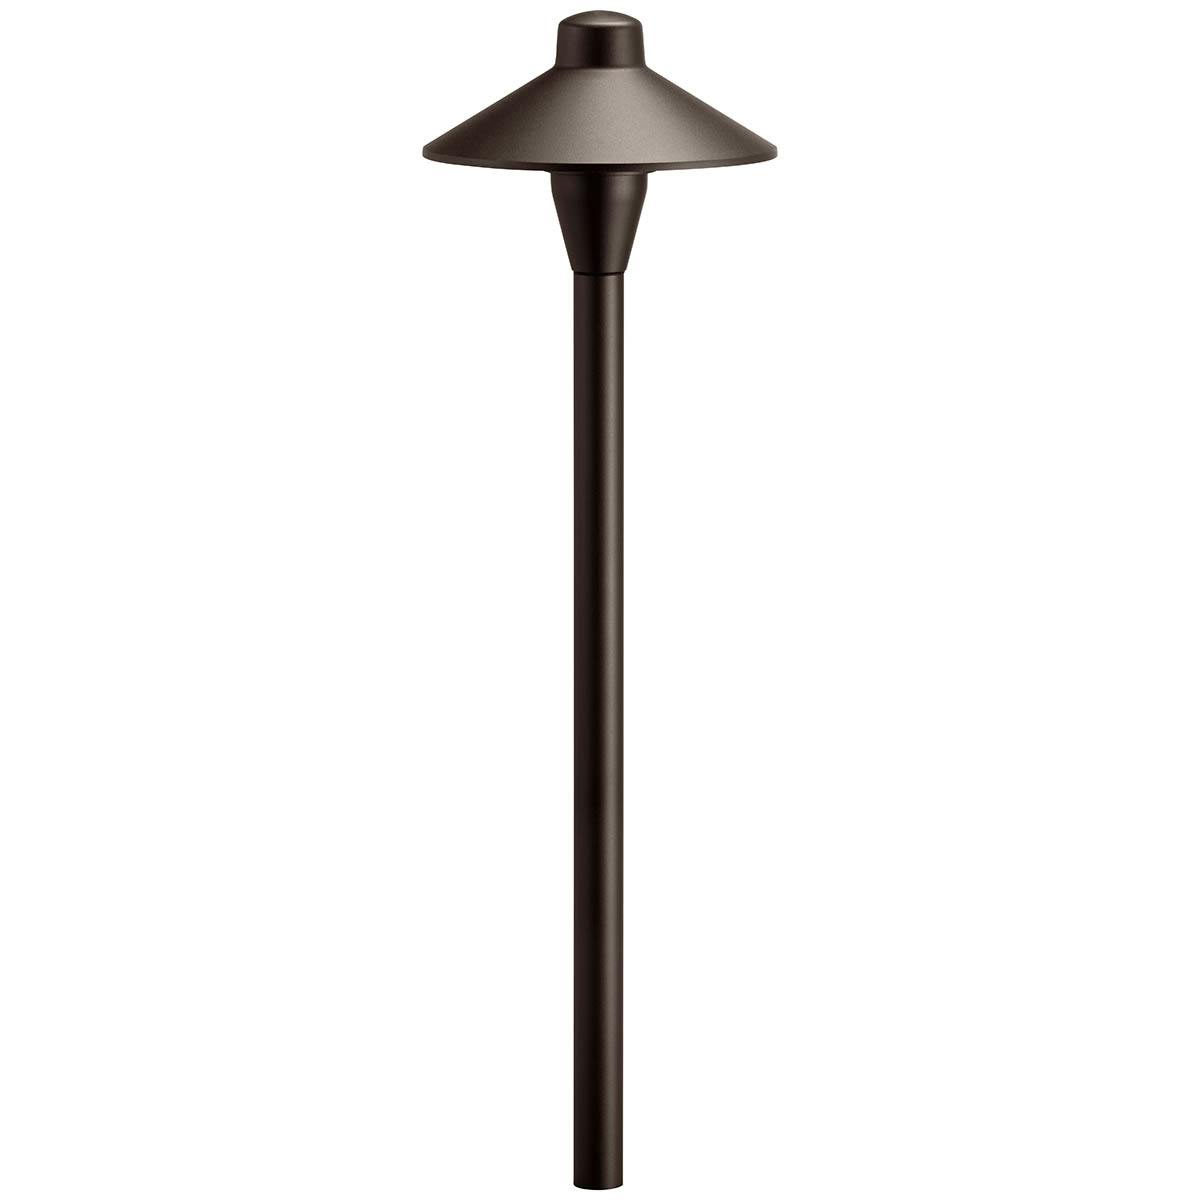 12V Brass 6.75" Path Light in Bronze on a white background